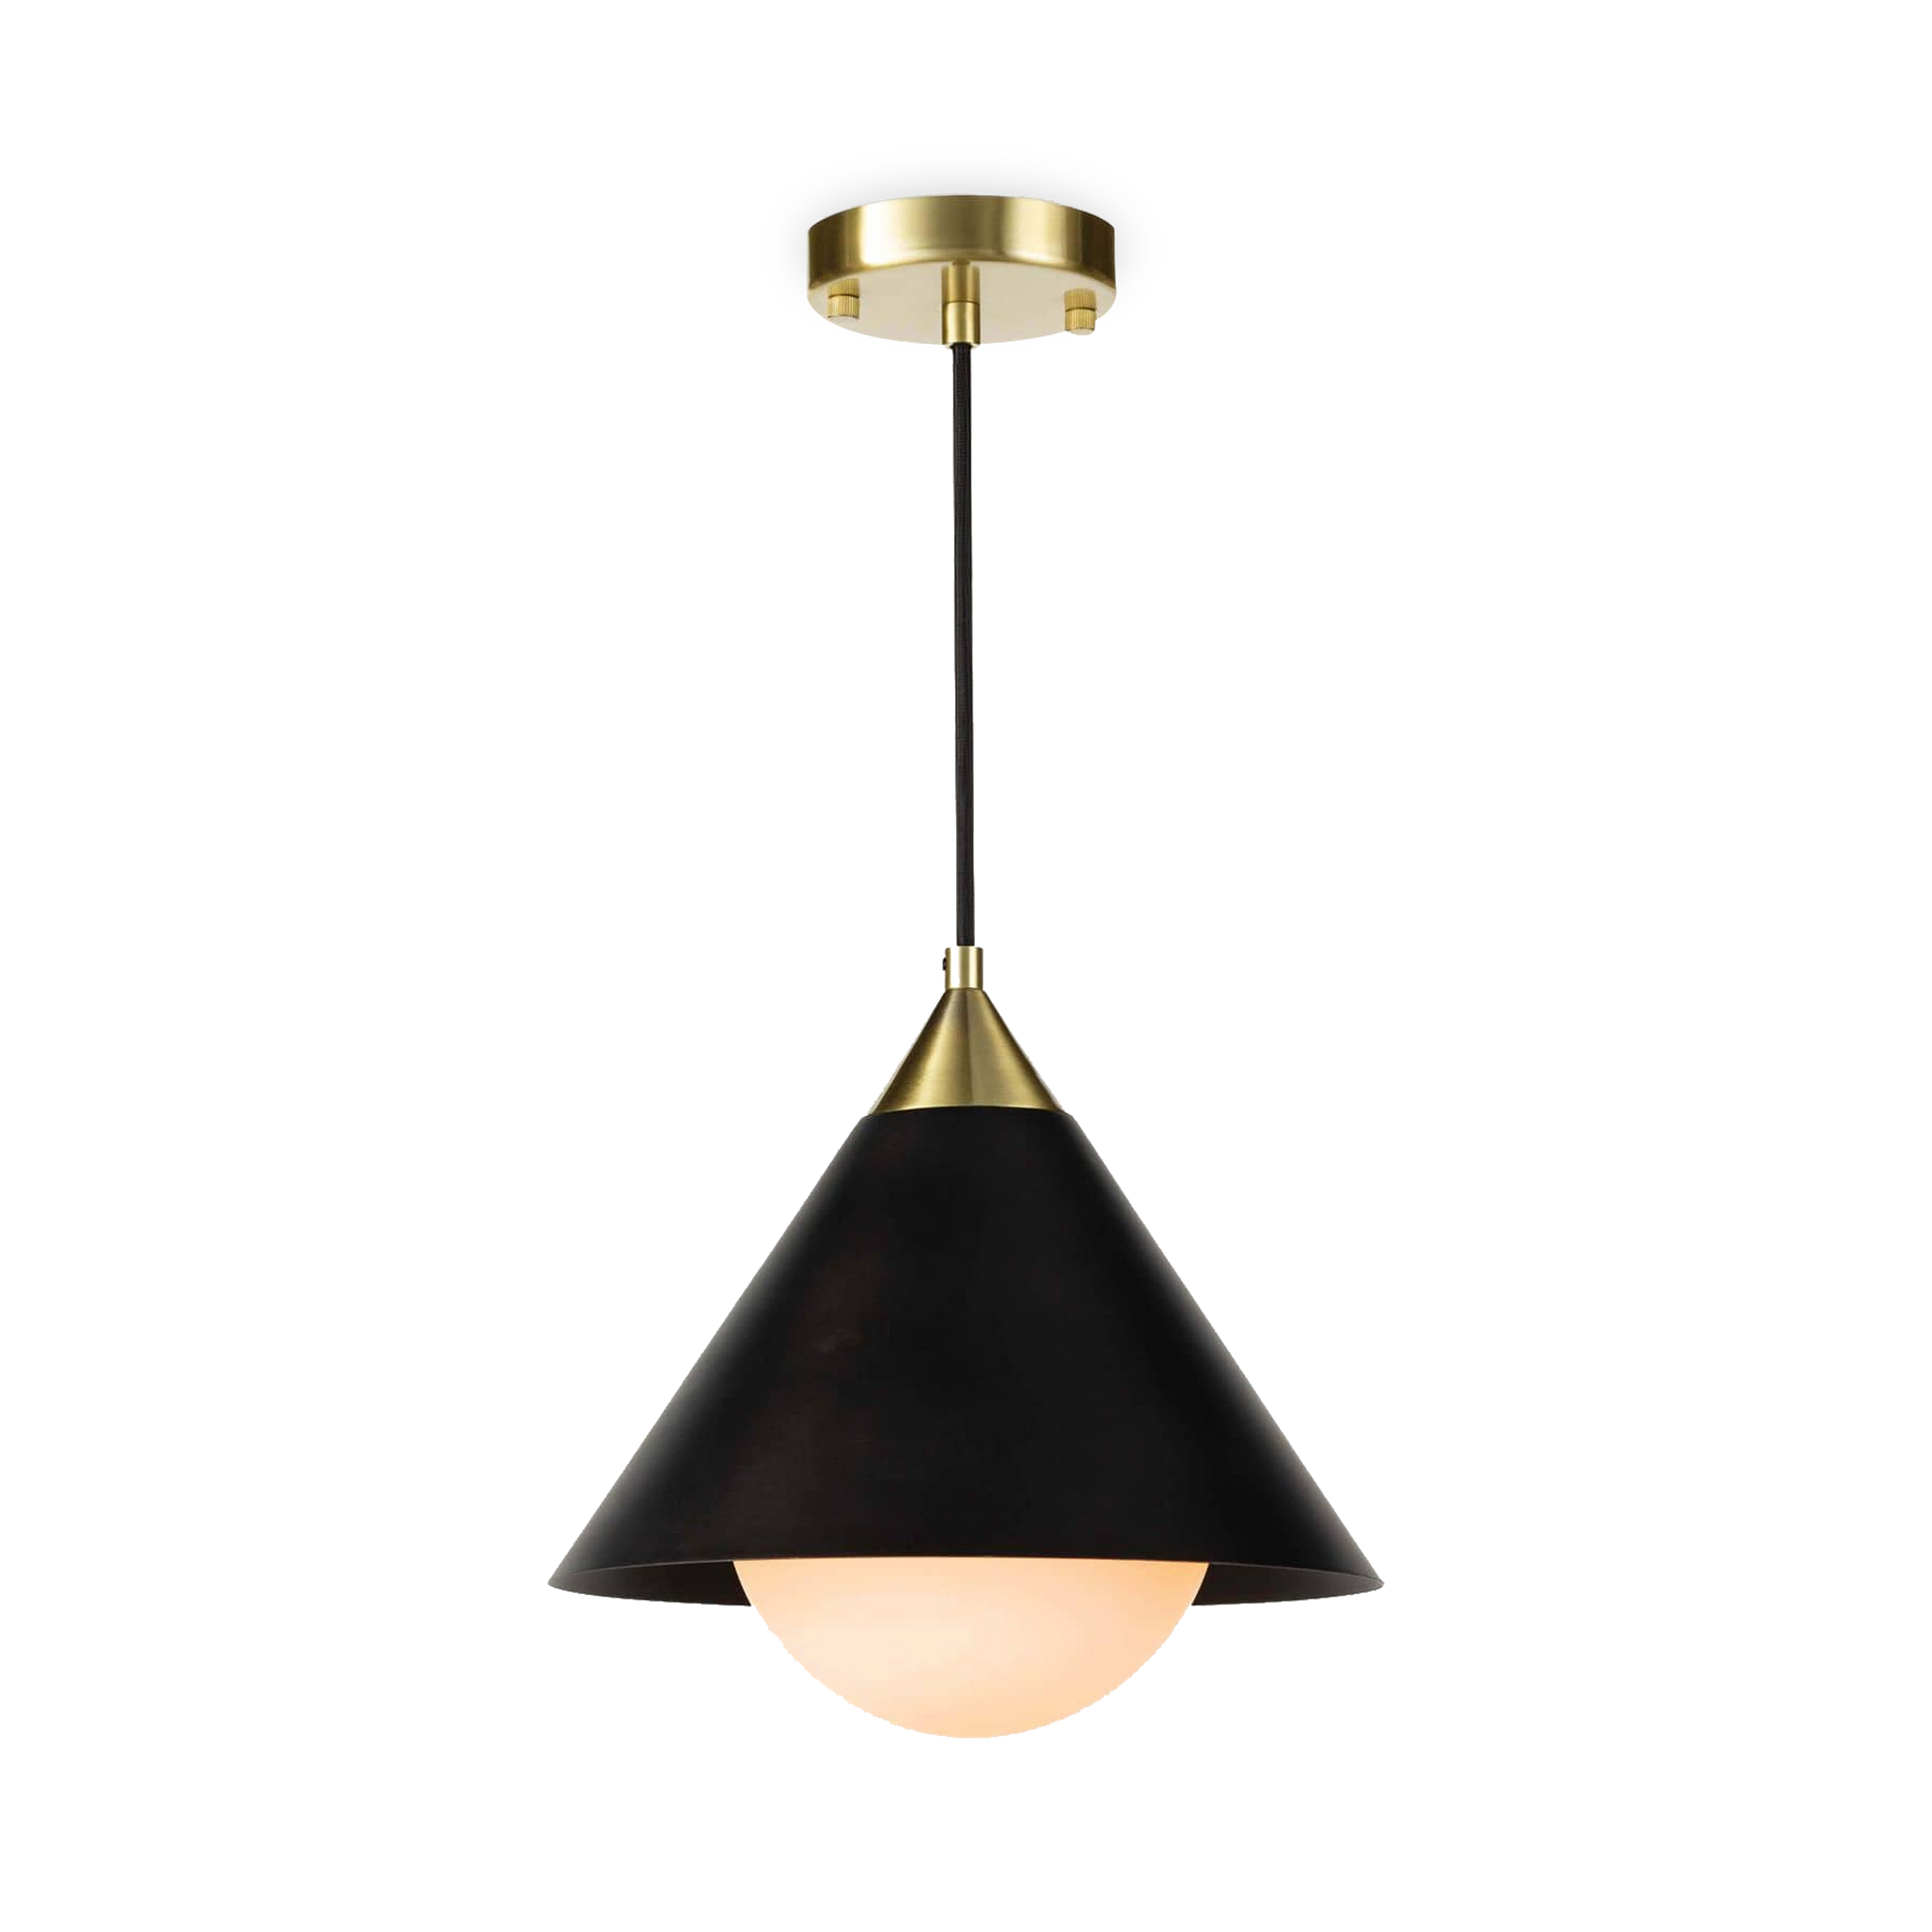 An elegantly modern pendant, the Hilton's conical shade is topped with a natural brass pop of contrast – and finished with the same warm brass canopy.